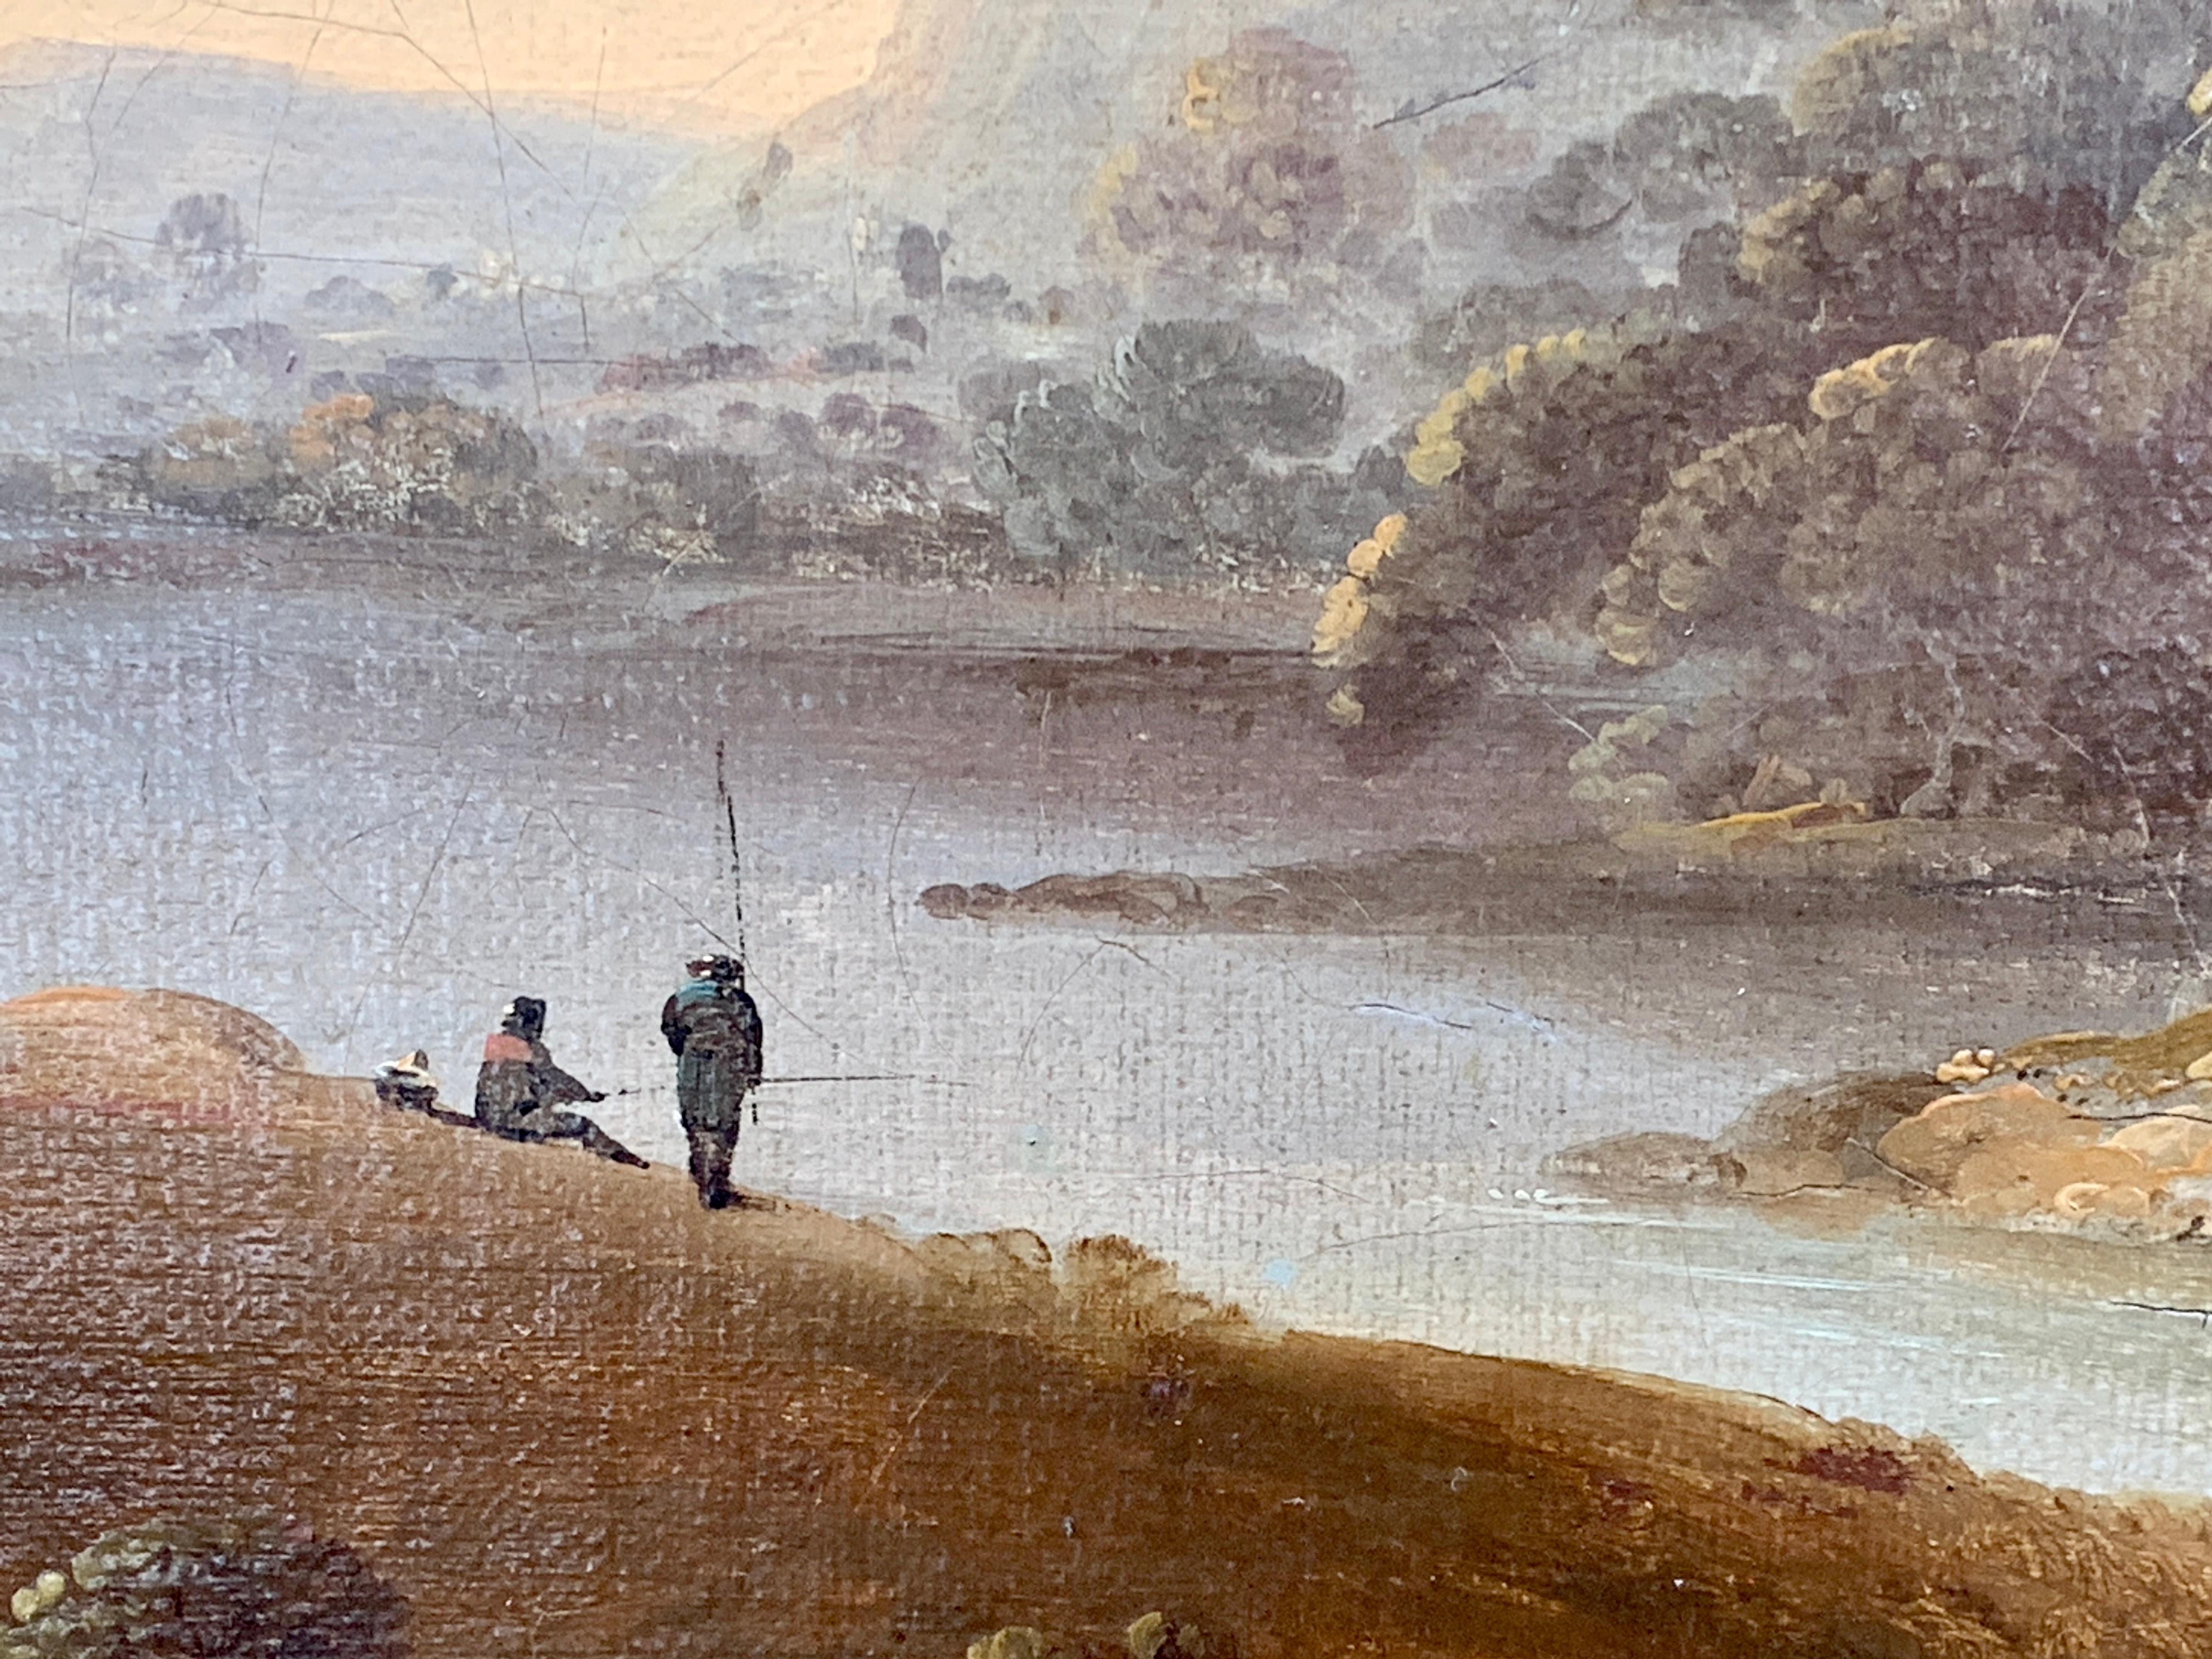  18th century English oil landscape with river and figures fishing by a cottage - Brown Figurative Painting by John Rathbone